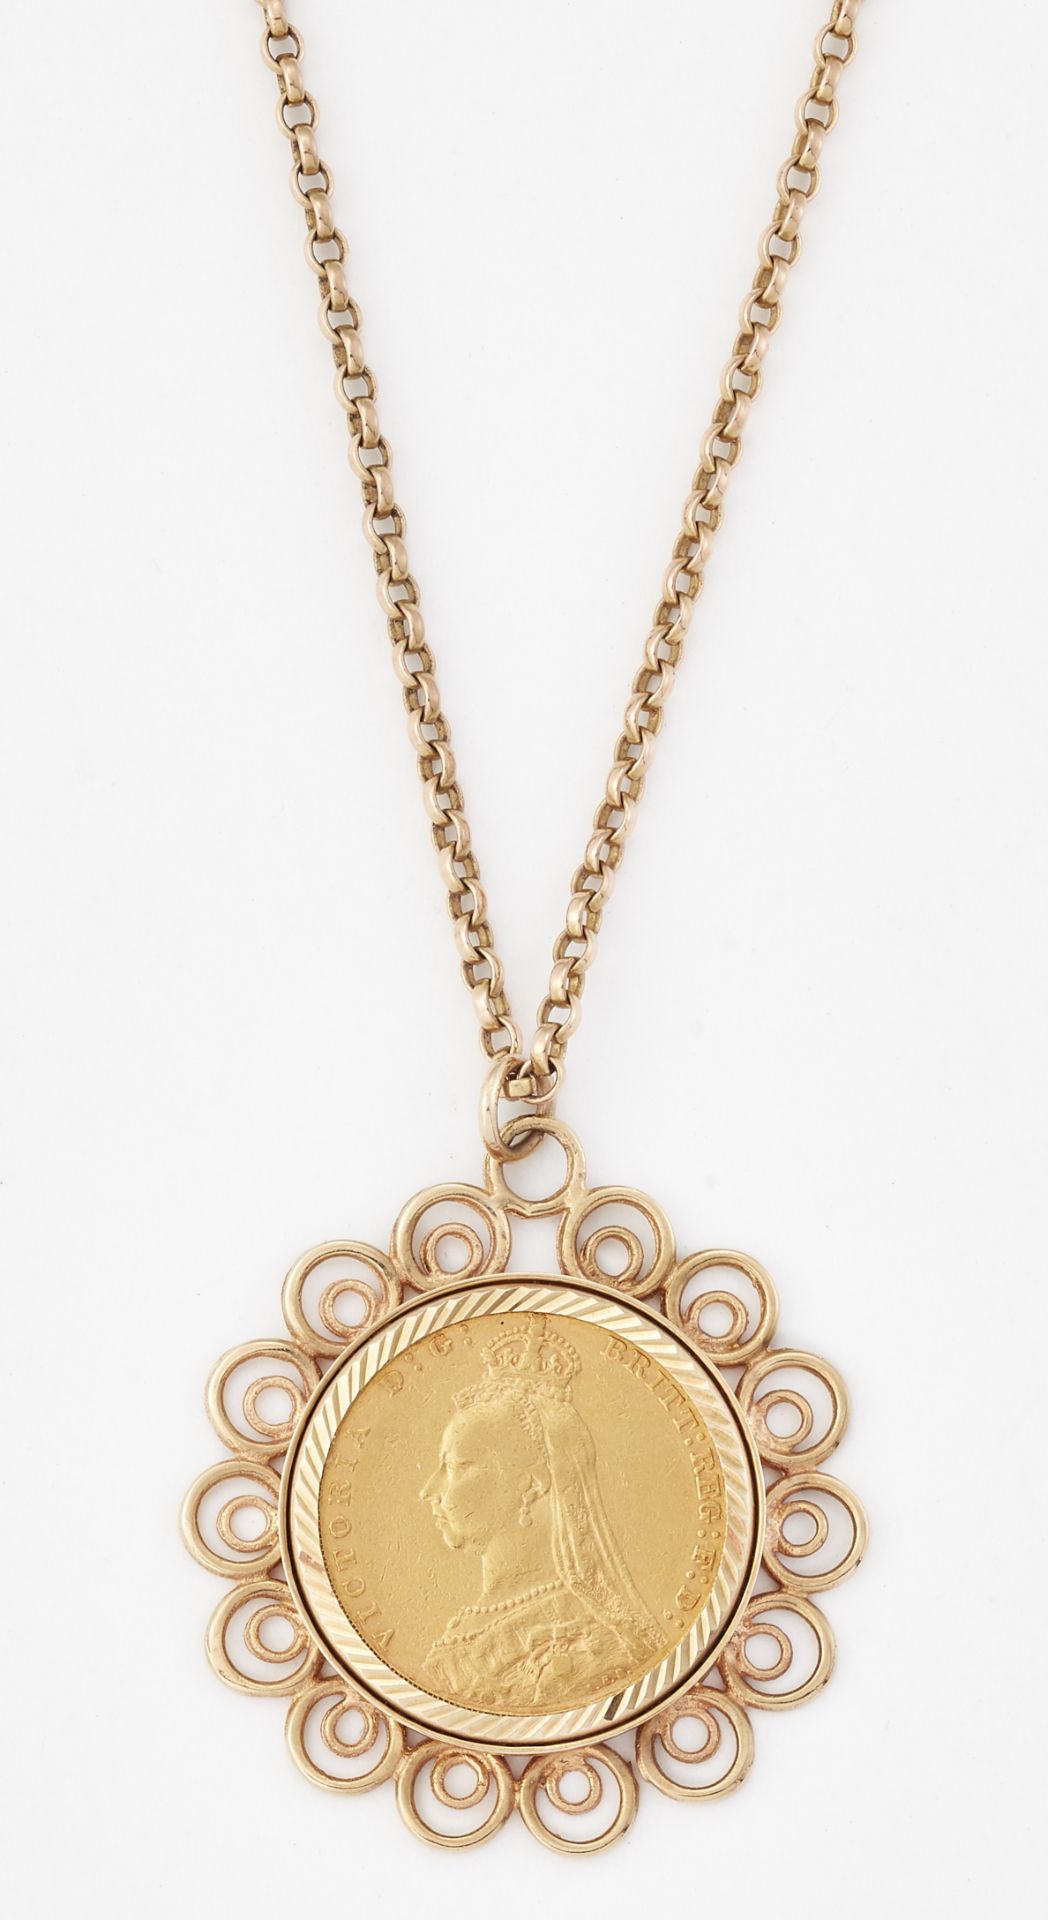 A 1889 VICTORIA SOVEREIGN LOOSE MOUNT IN A 9CT GOLD SCROLL FRAME AS A PENDANT